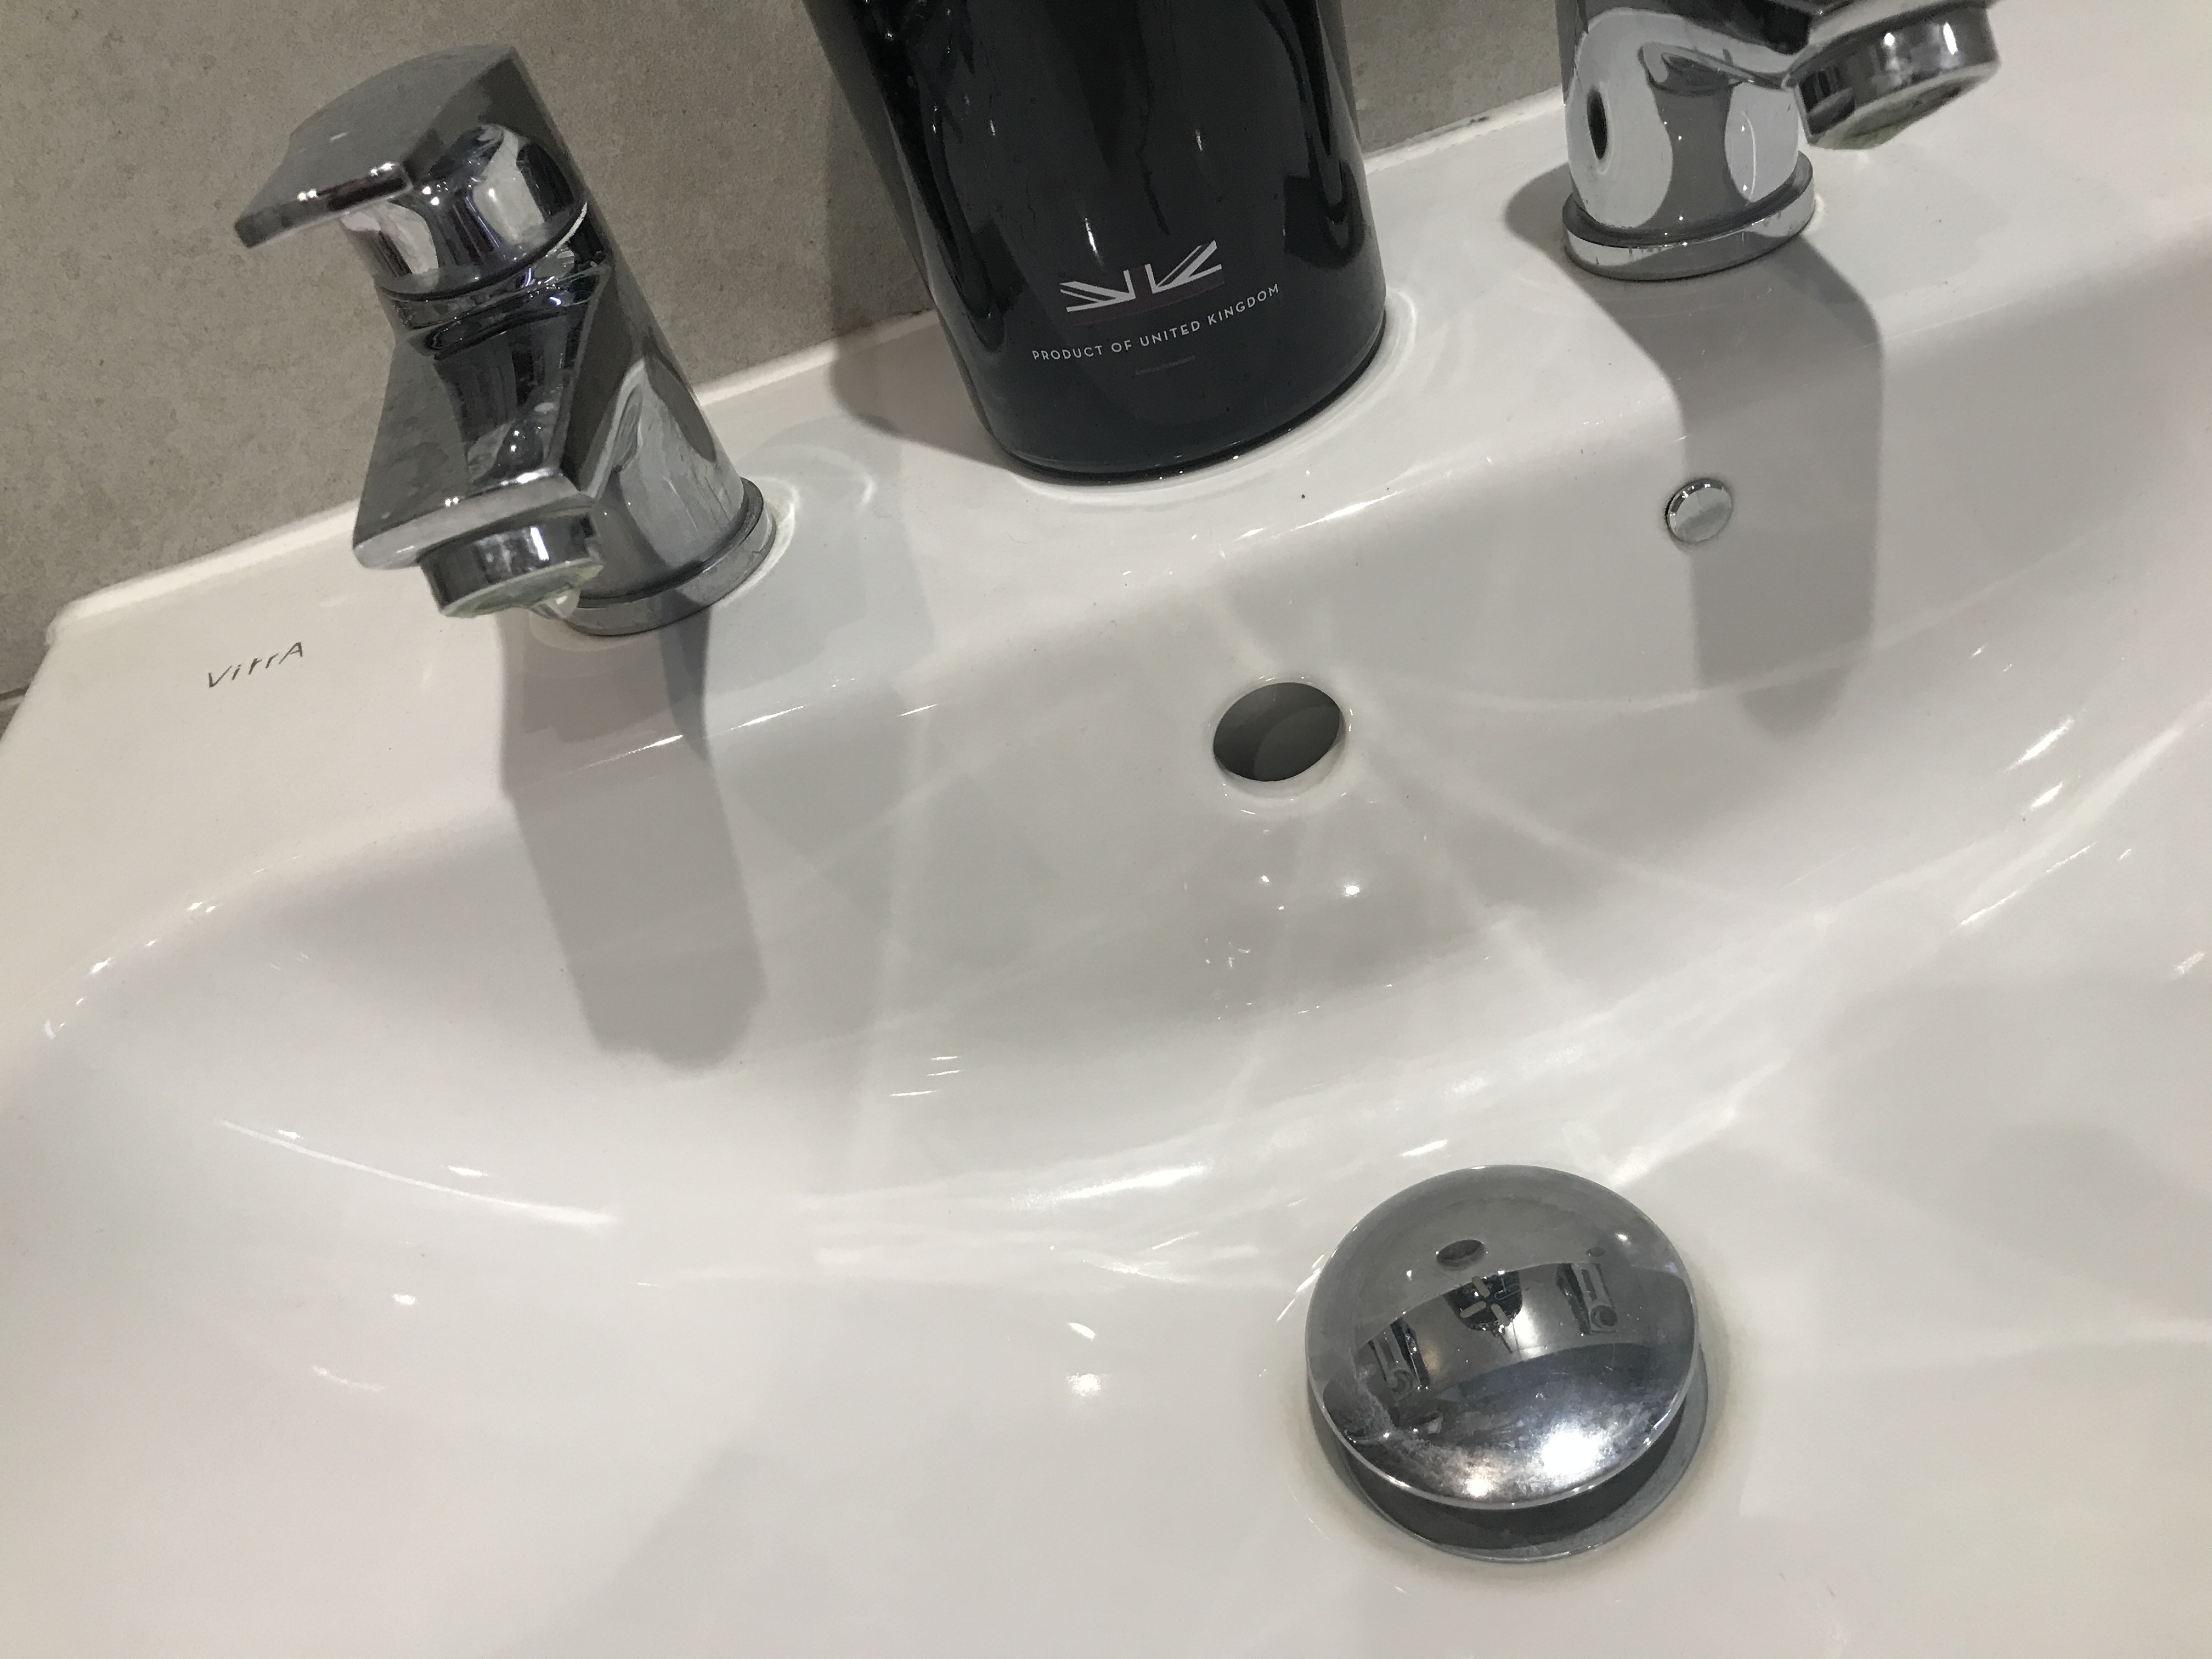 A photo of a household sink that produces wastewater when you wash your hands